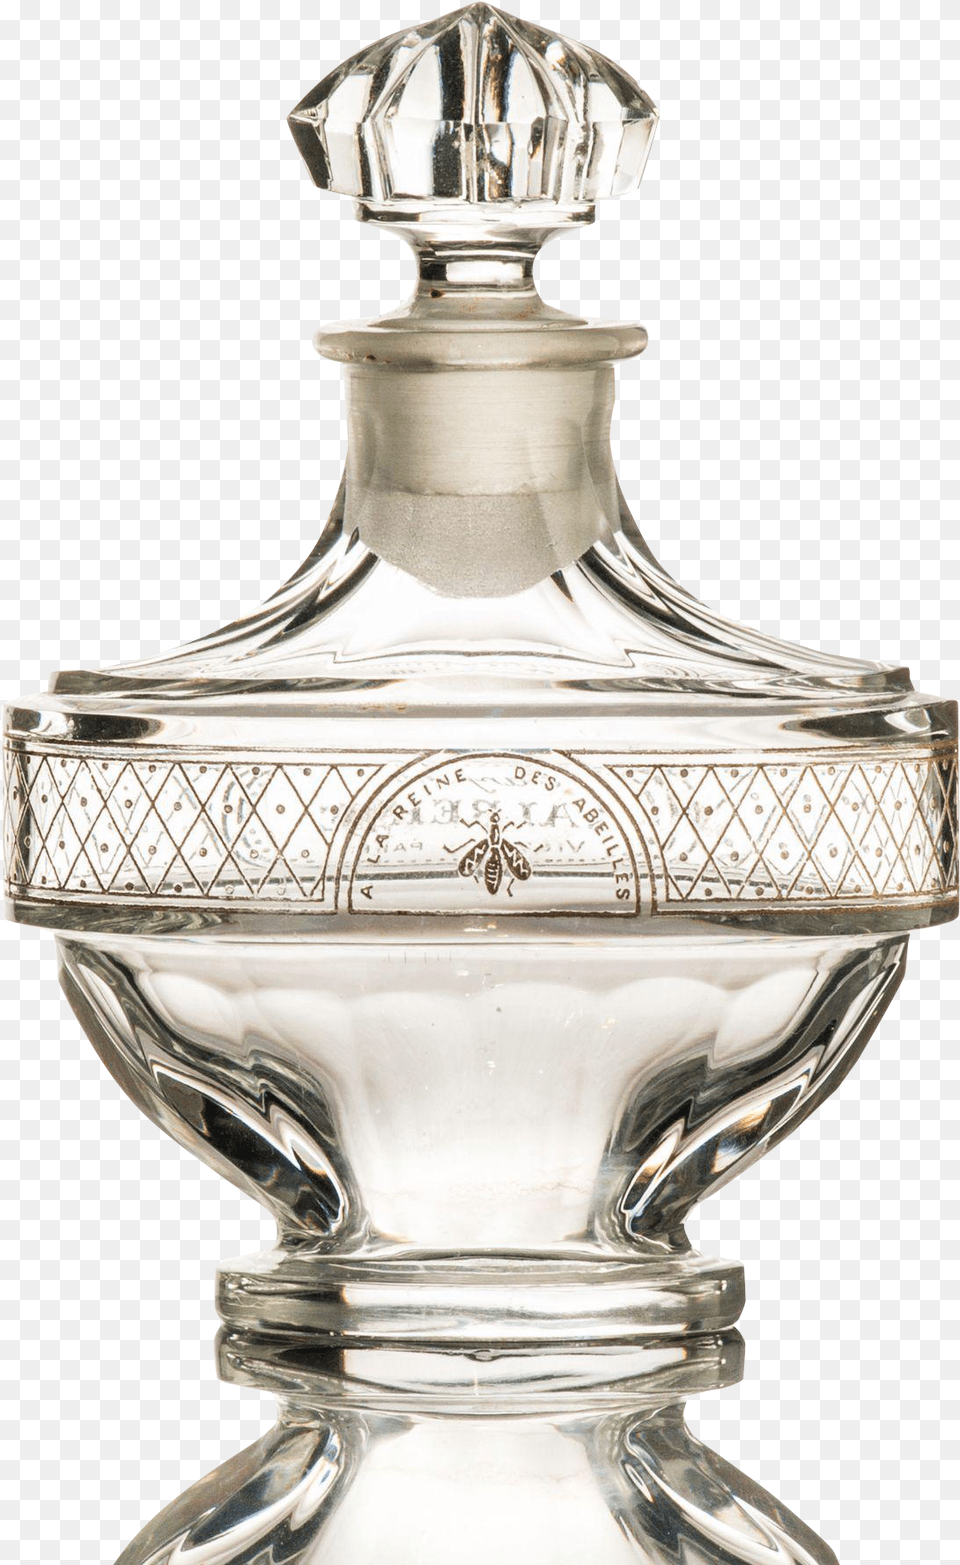 Vintage Perfume Bottle Vintage Perfume Bottle, Jar, Cosmetics, Pottery, Smoke Pipe Free Transparent Png